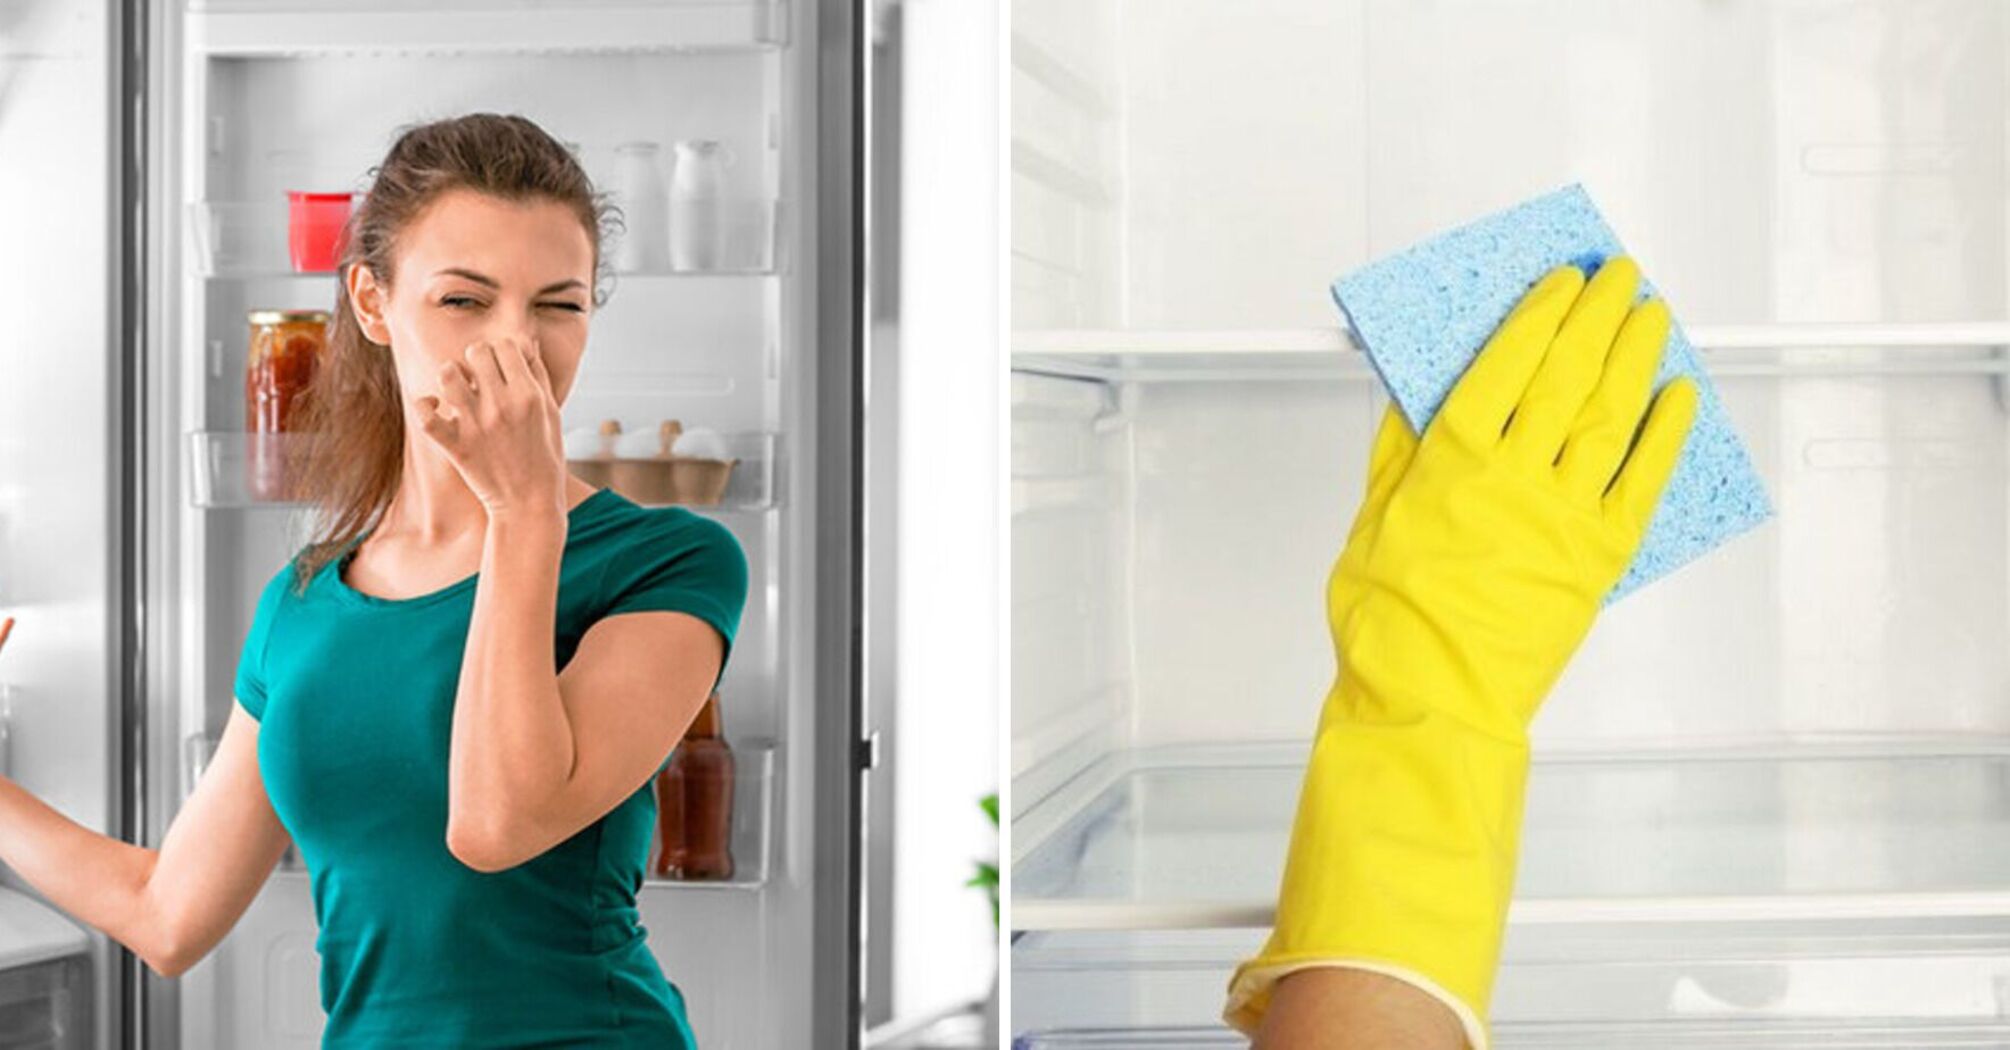 Bad odor from the refrigerator? Tips to help solve the problem